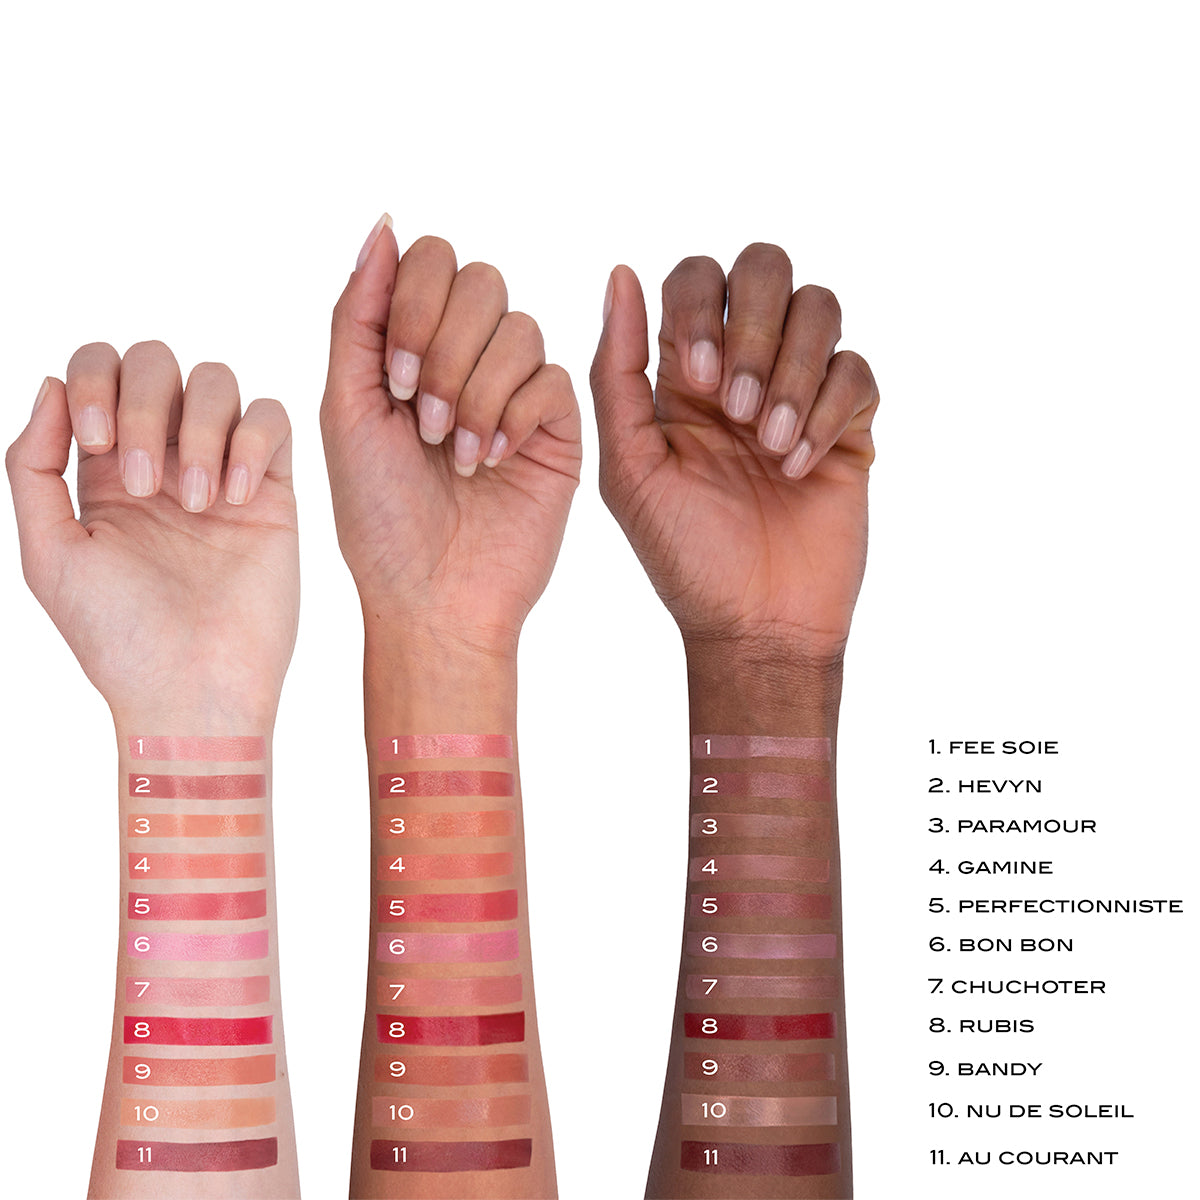 ALLVAR - lighter than lipstick and less shiny than lip gloss swatches shown on various skin tones